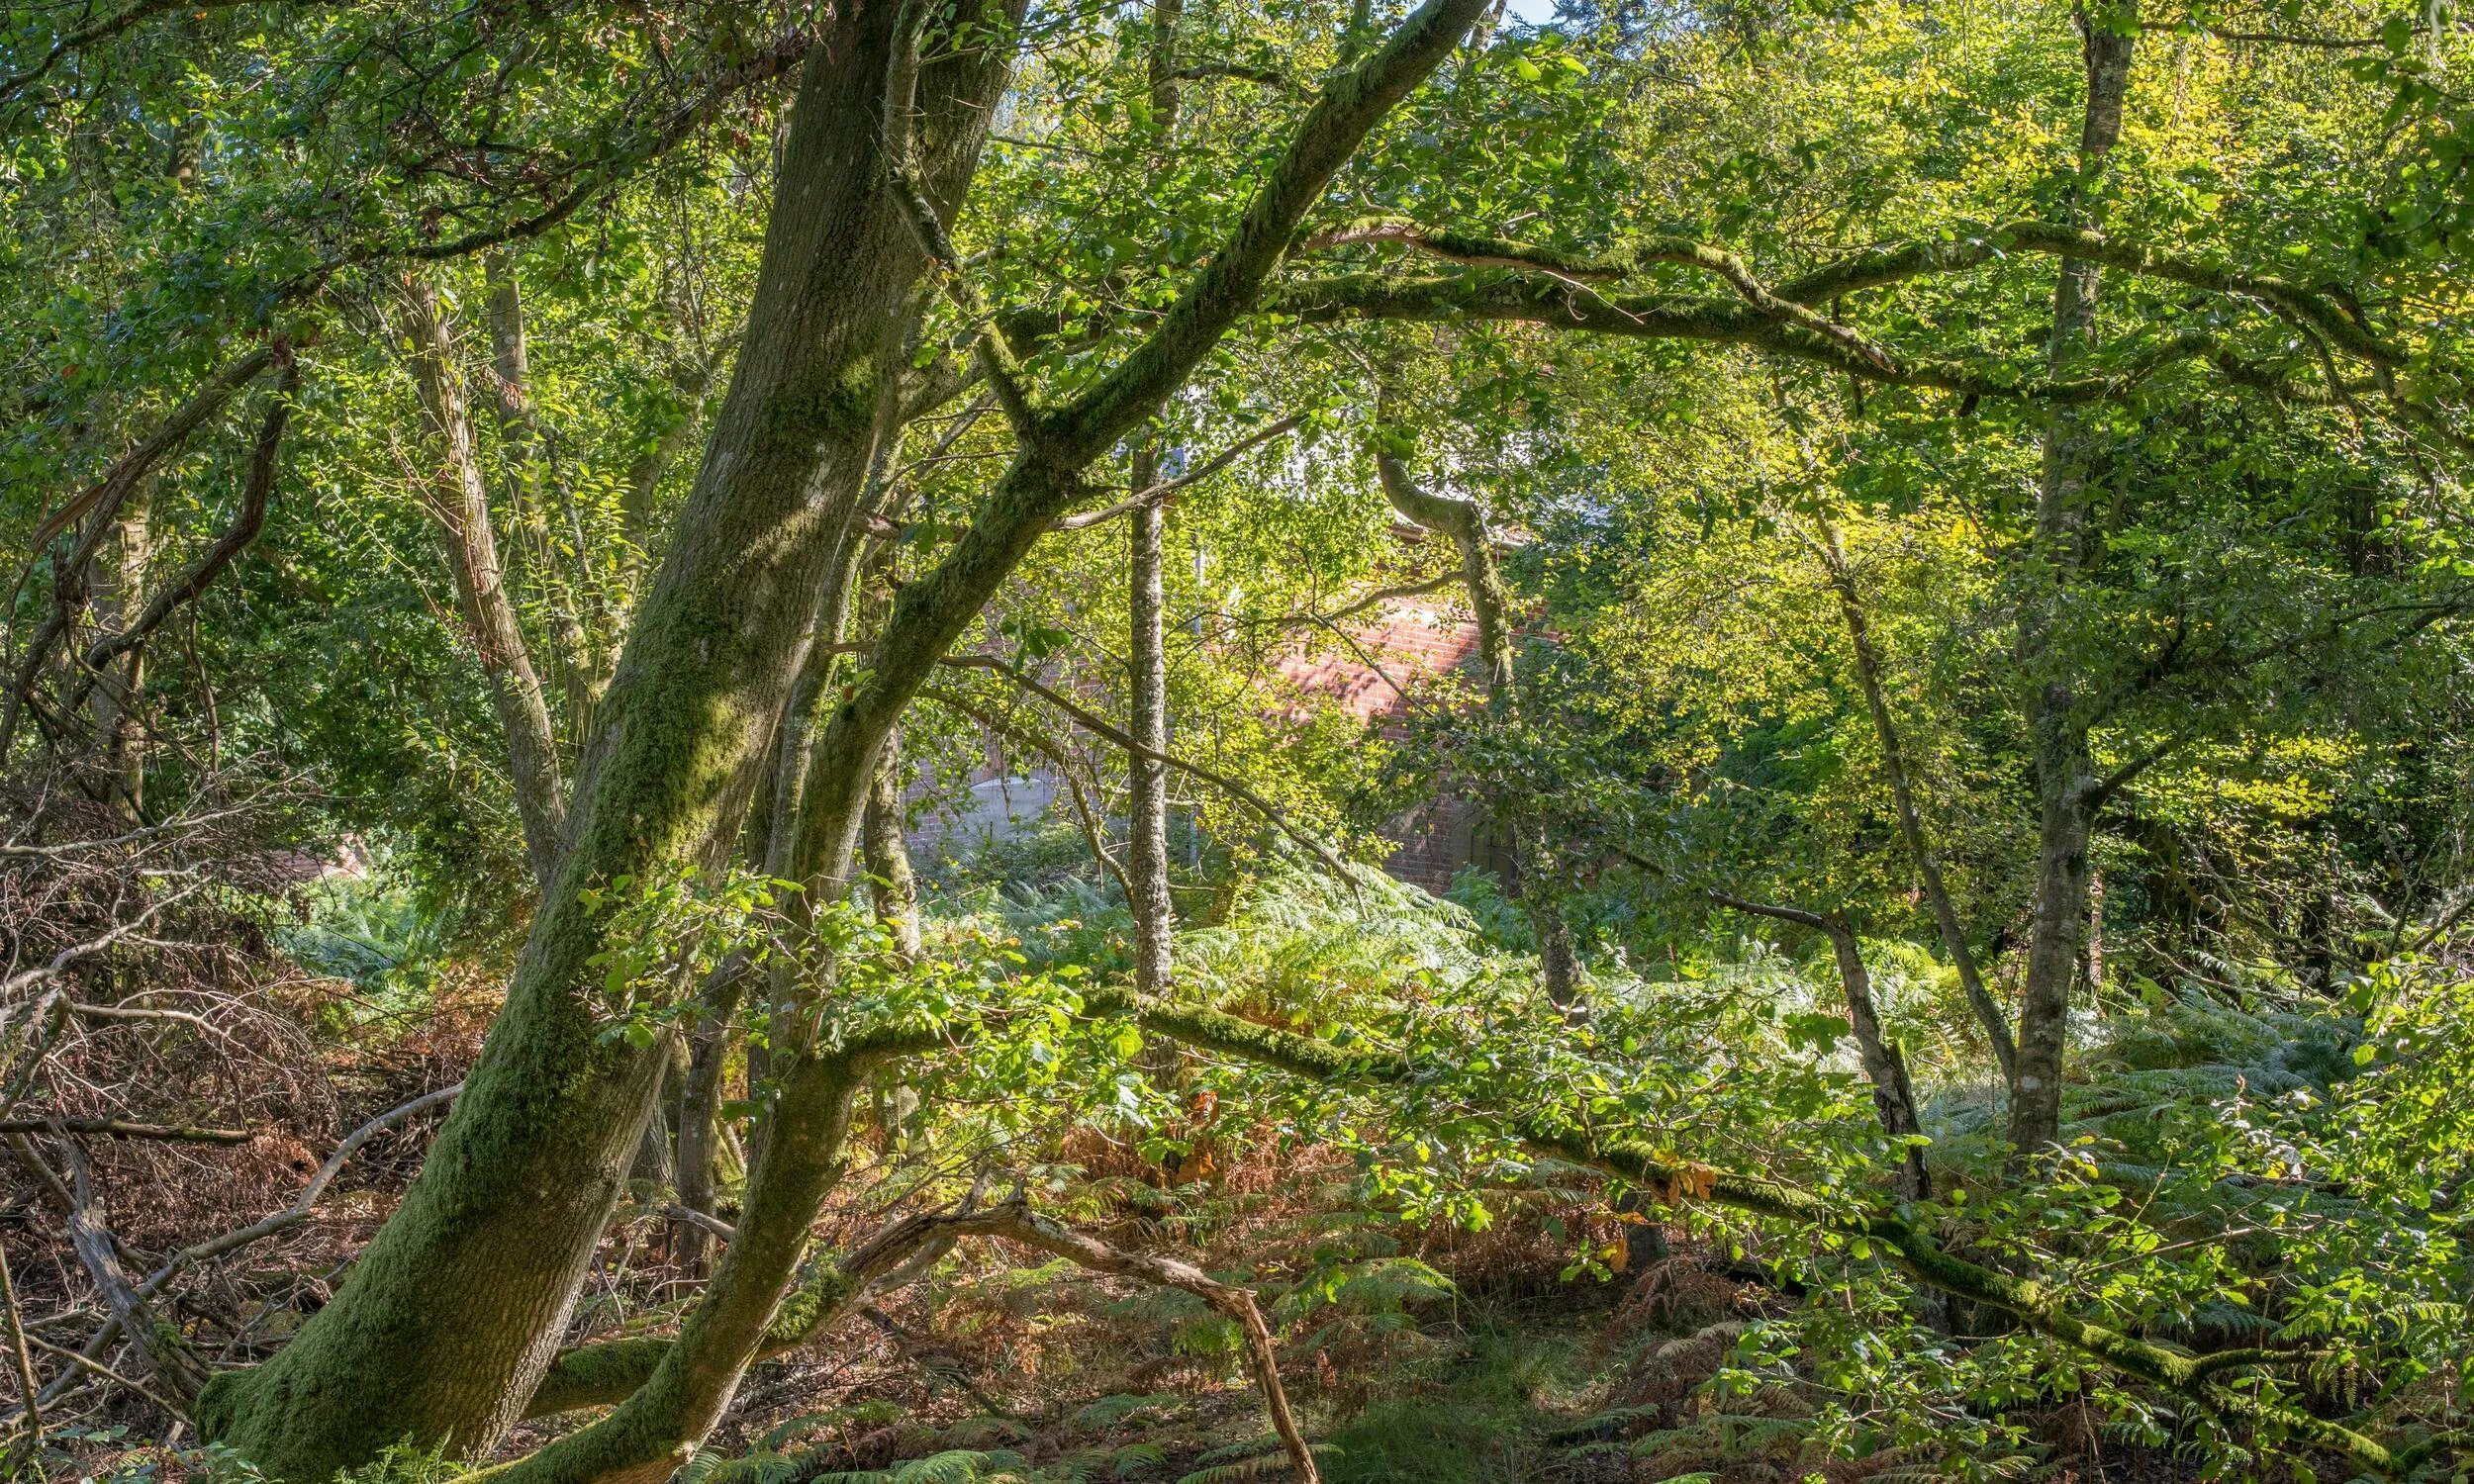 A view of the woodland that makes up a part of Cameron's cottage.